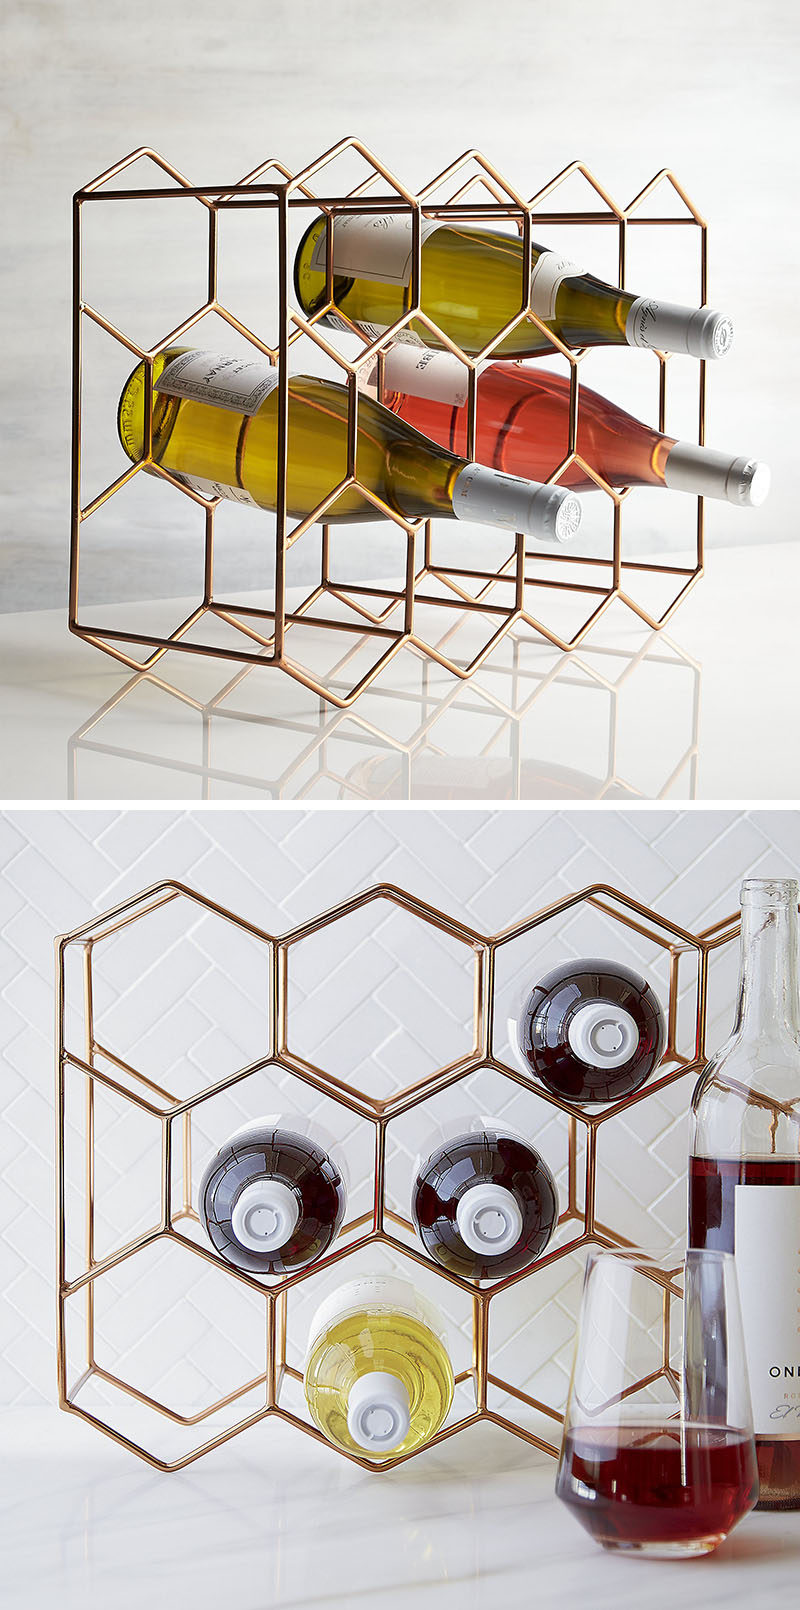 13 Wine Bottle Storage Ideas For Your Stylish Home // This sleek copper wine rack can hold 11 bottles of wine within the hexagons on both sides.